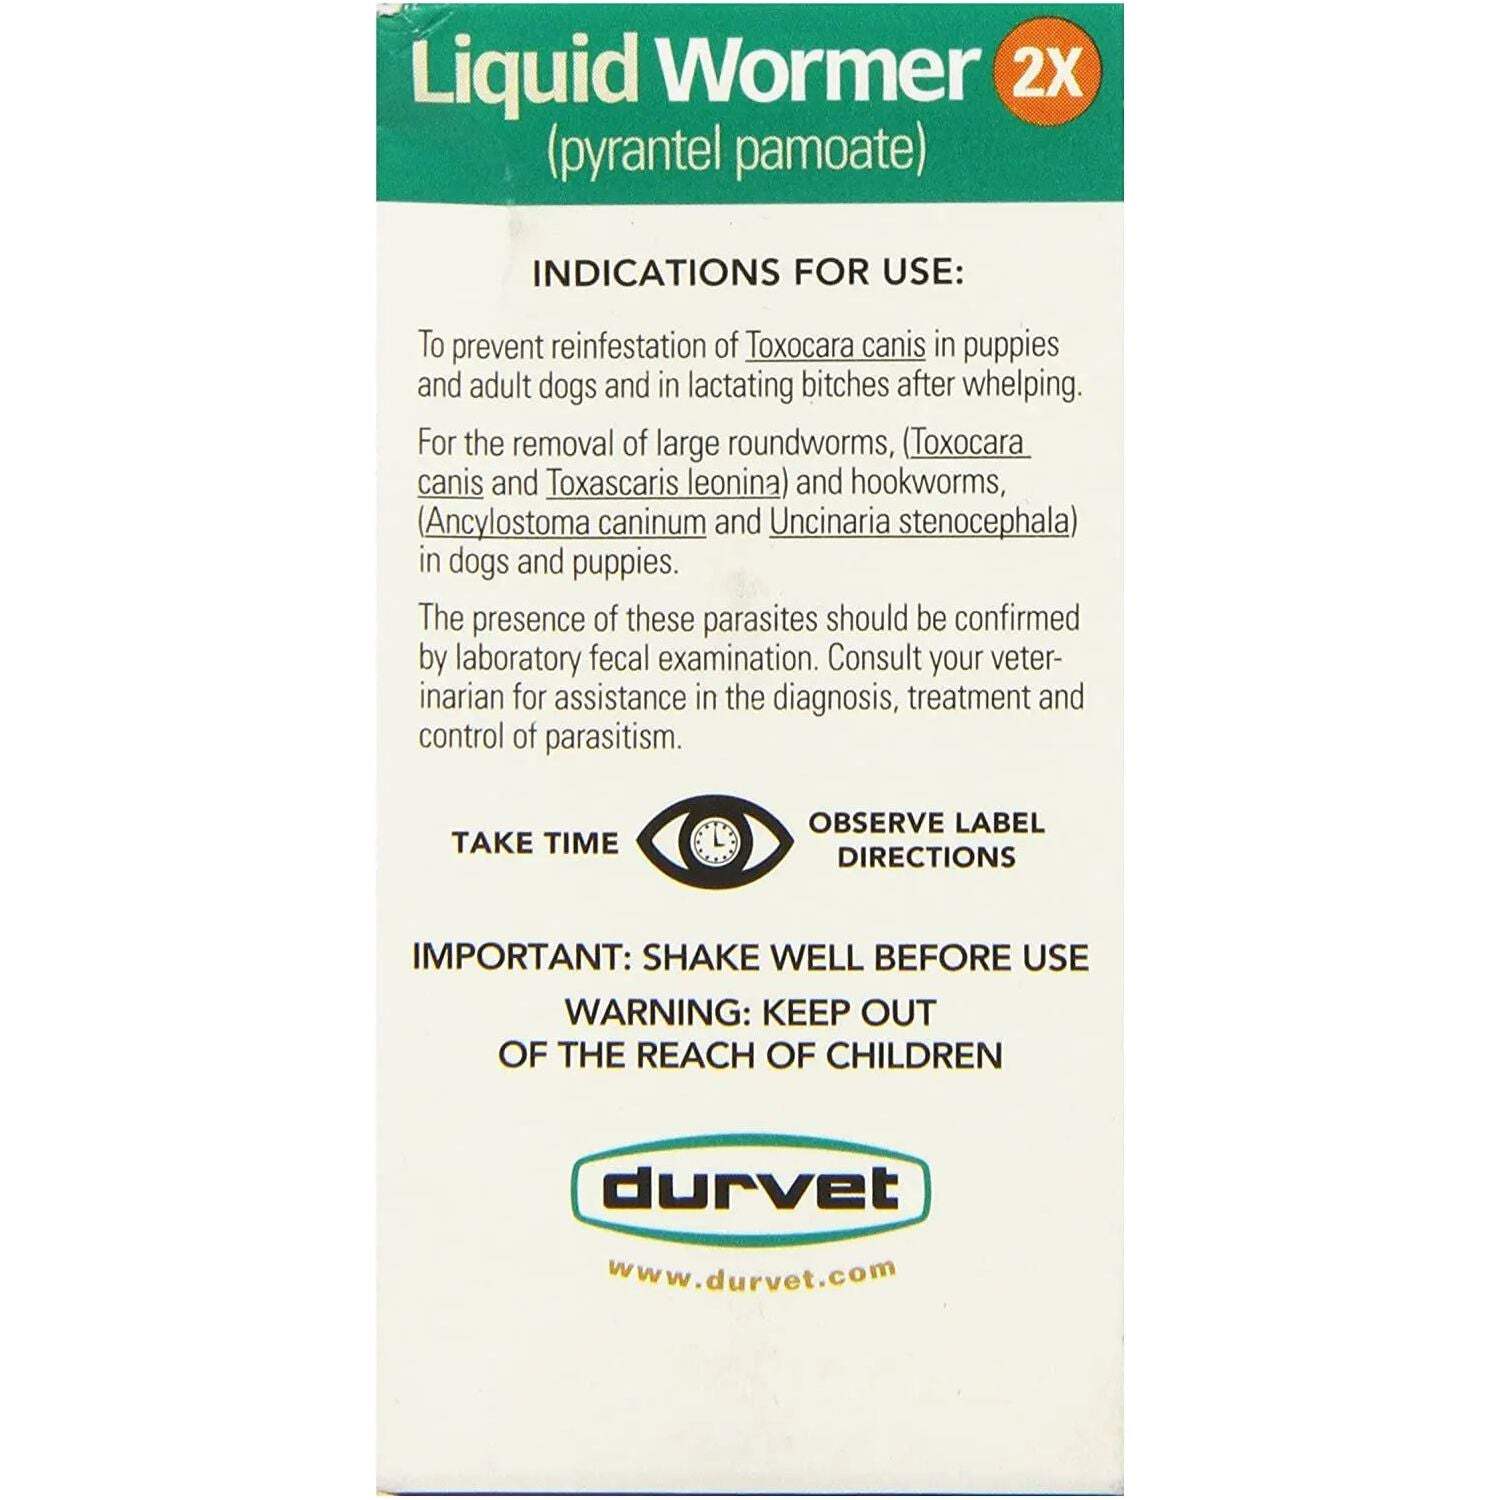 Durvet Liquid Wormer 2x for Puppies and Adult Dogs 2 oz. - image 2 of 3